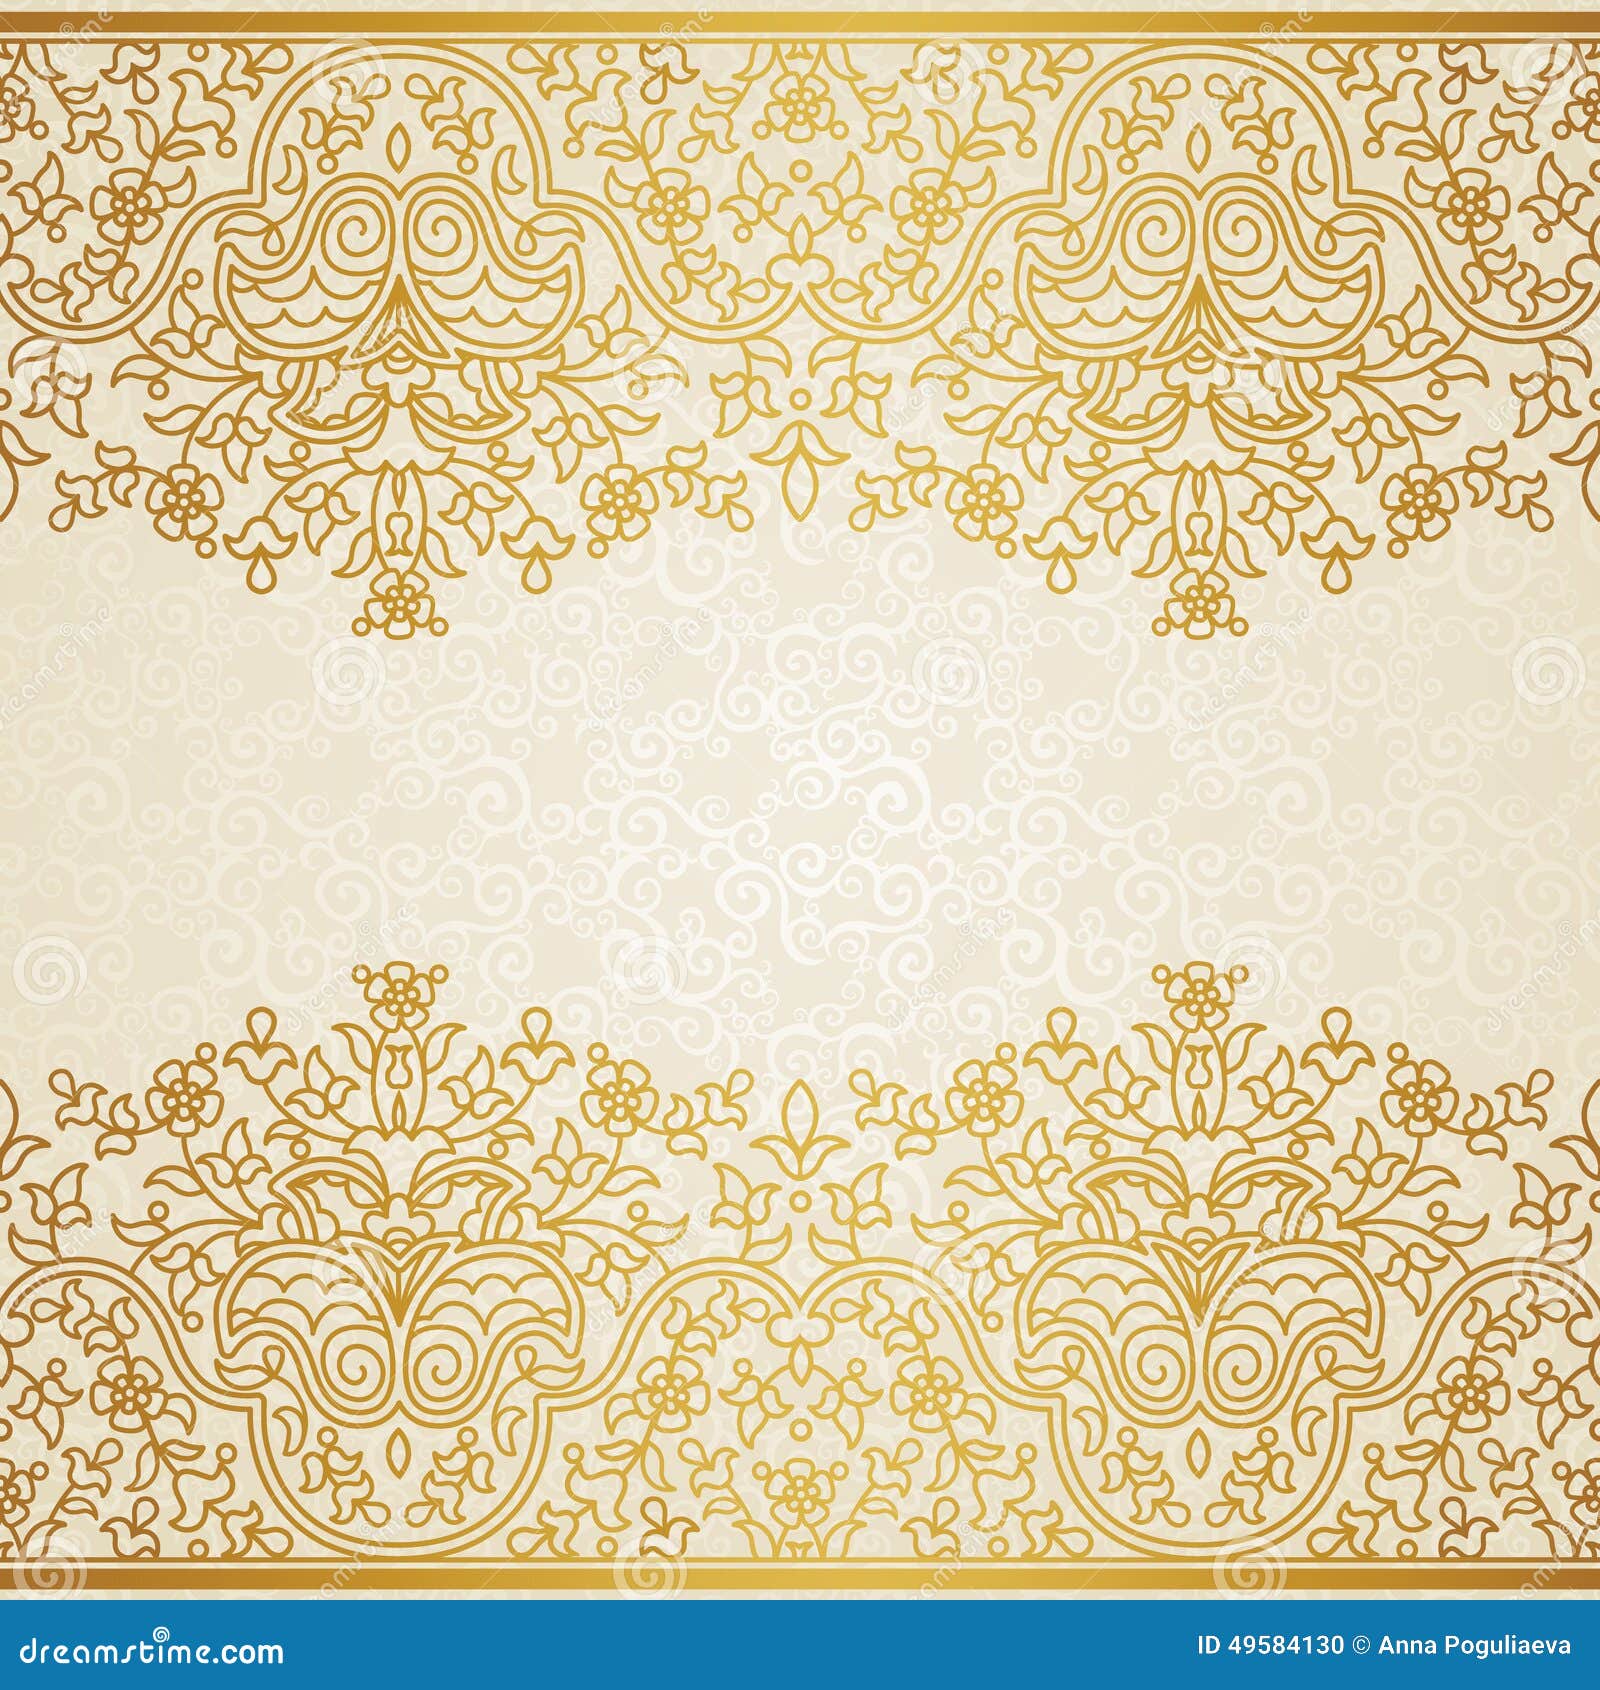 Vector Floral Border In Eastern Style Stock Vector 